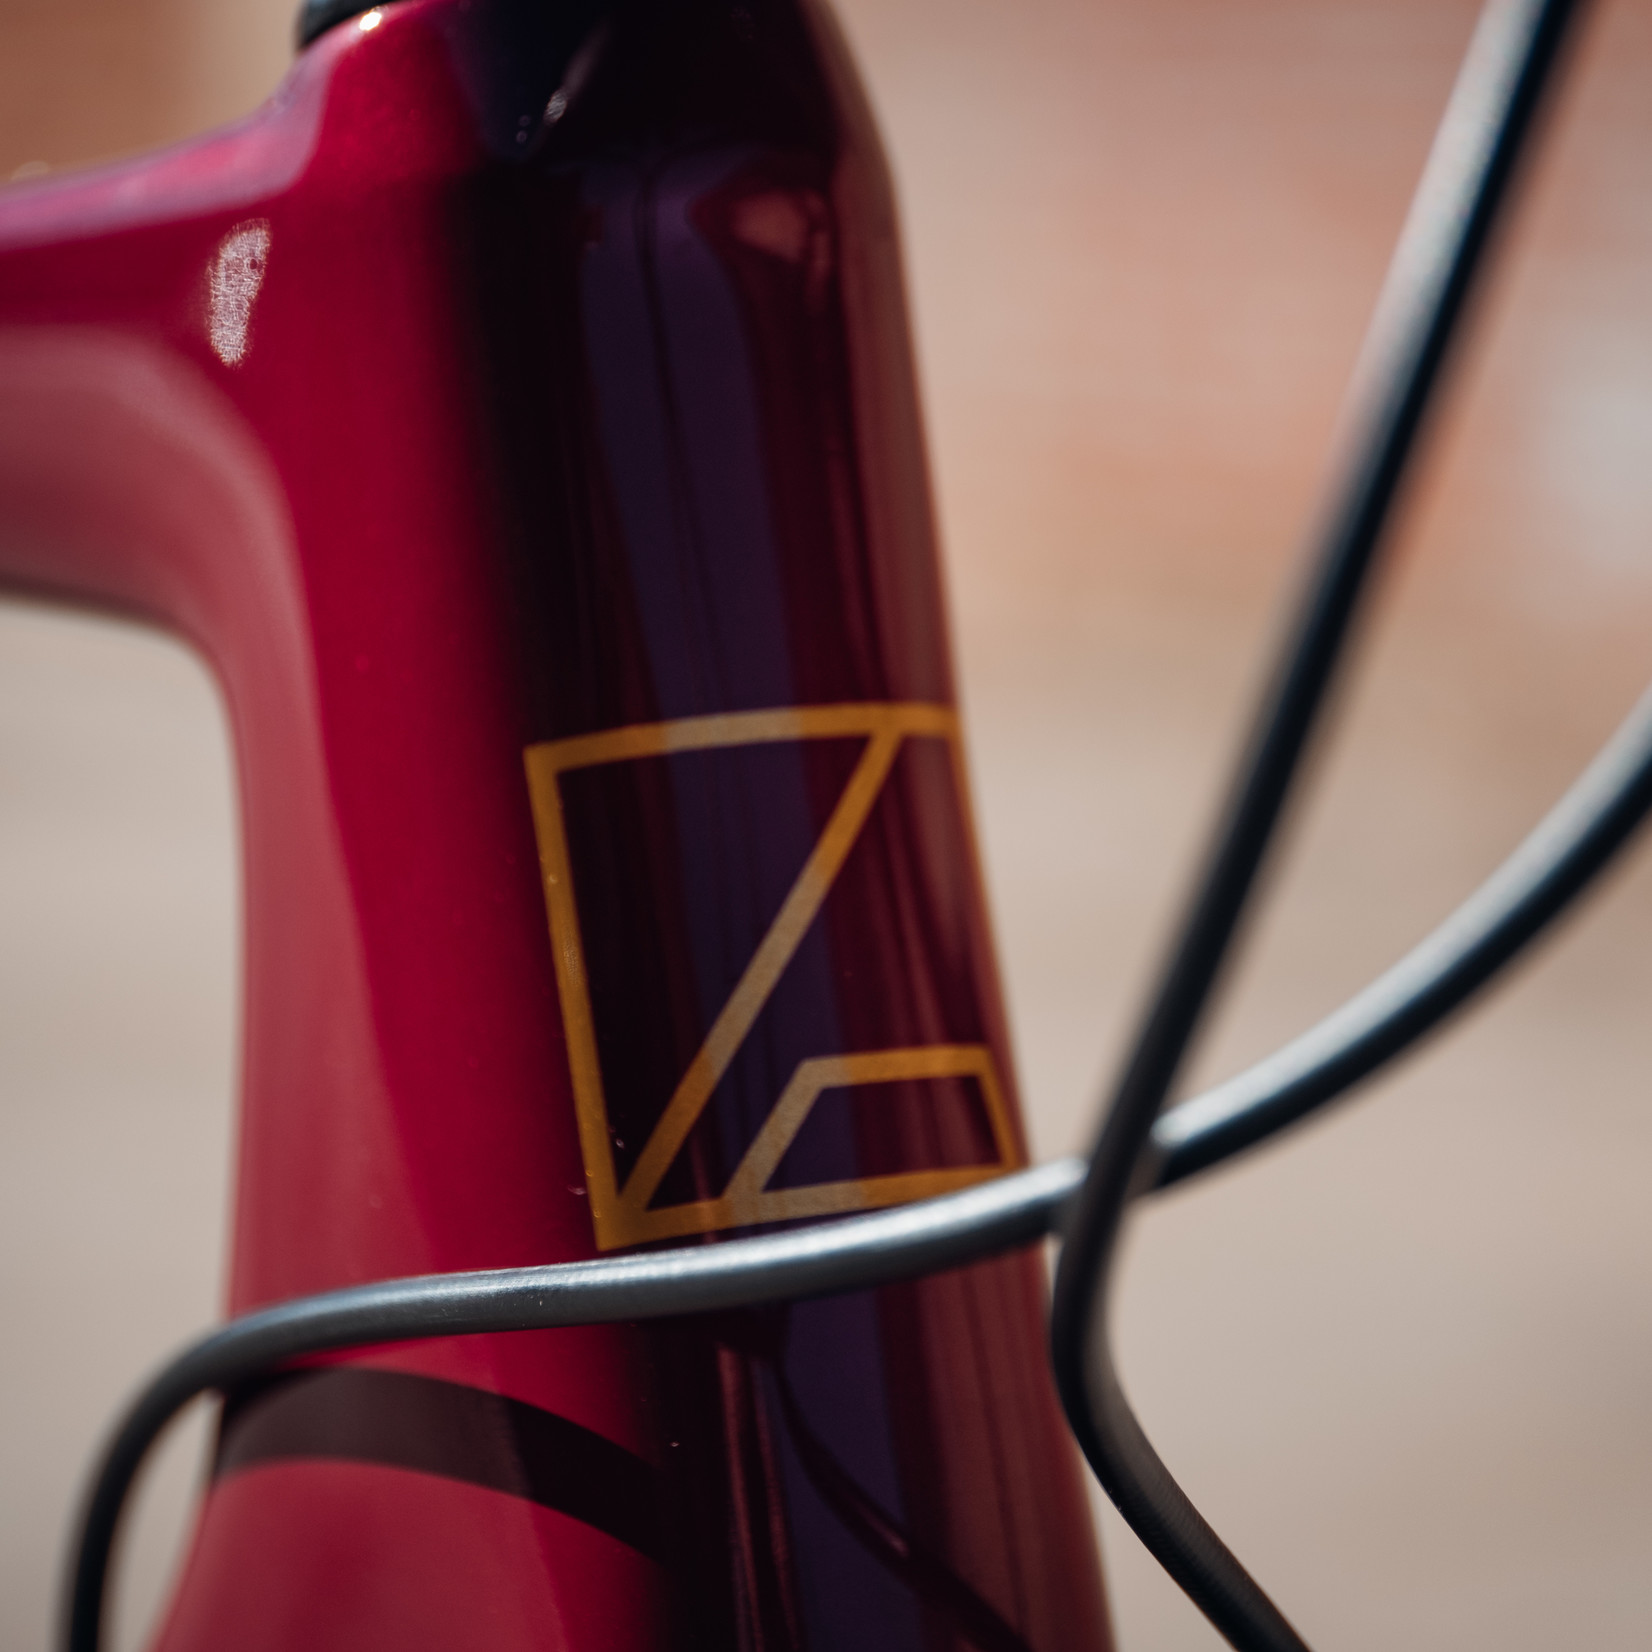 ALLIED Cycle Works ALLIED Cycle Works - ABLE  - Lg - Rival eTap / Wineberry / Gold